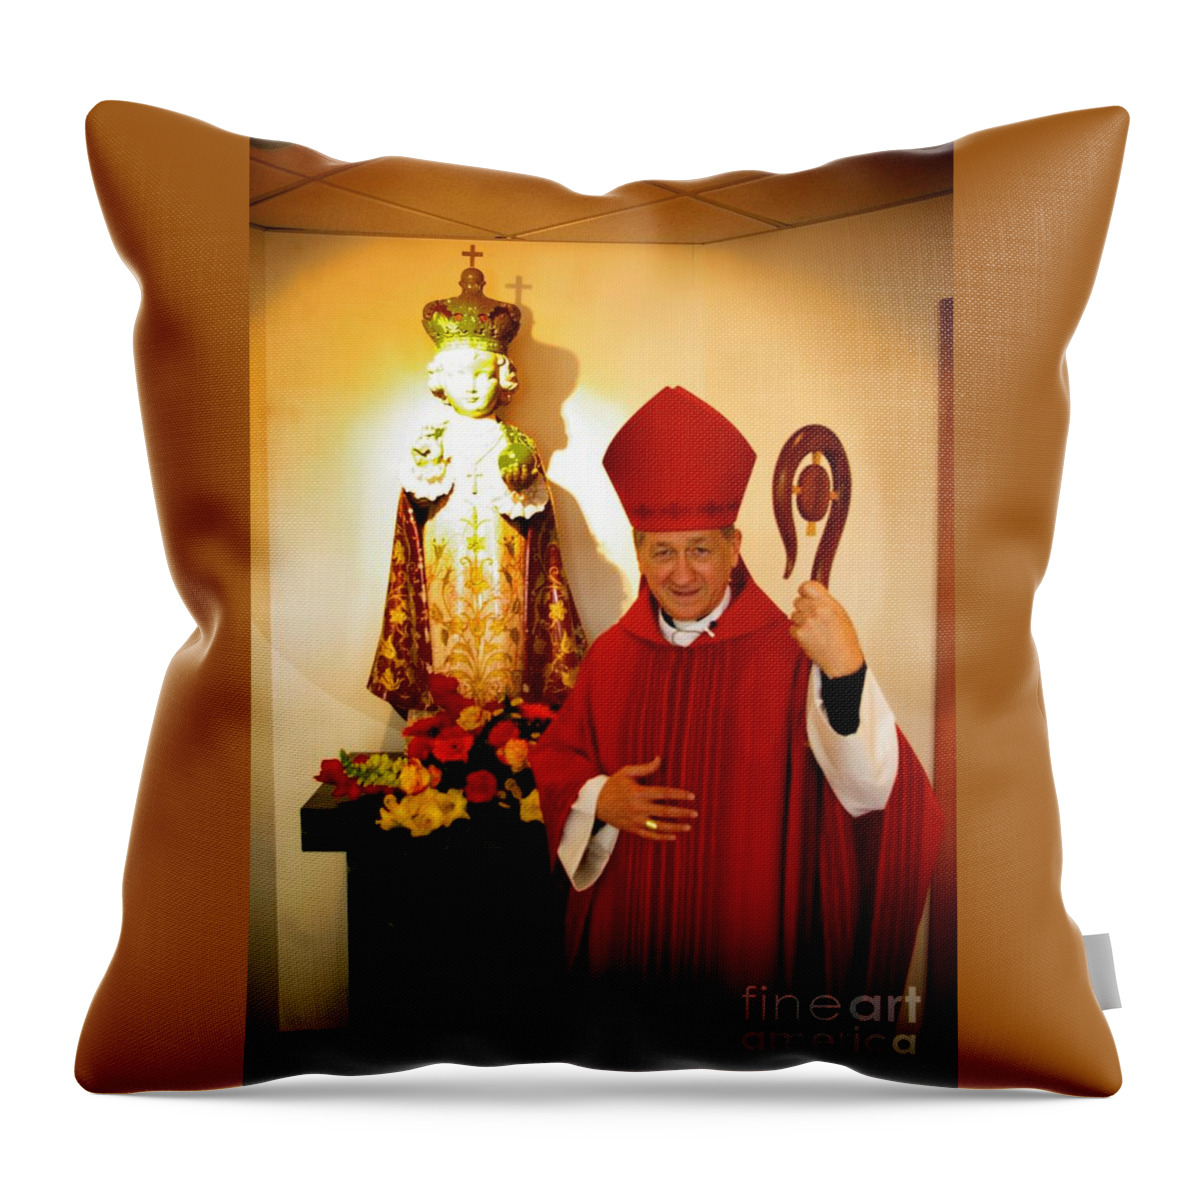 Frank-j-casella Throw Pillow featuring the photograph Infant Jesus and the Archbishop by Frank J Casella